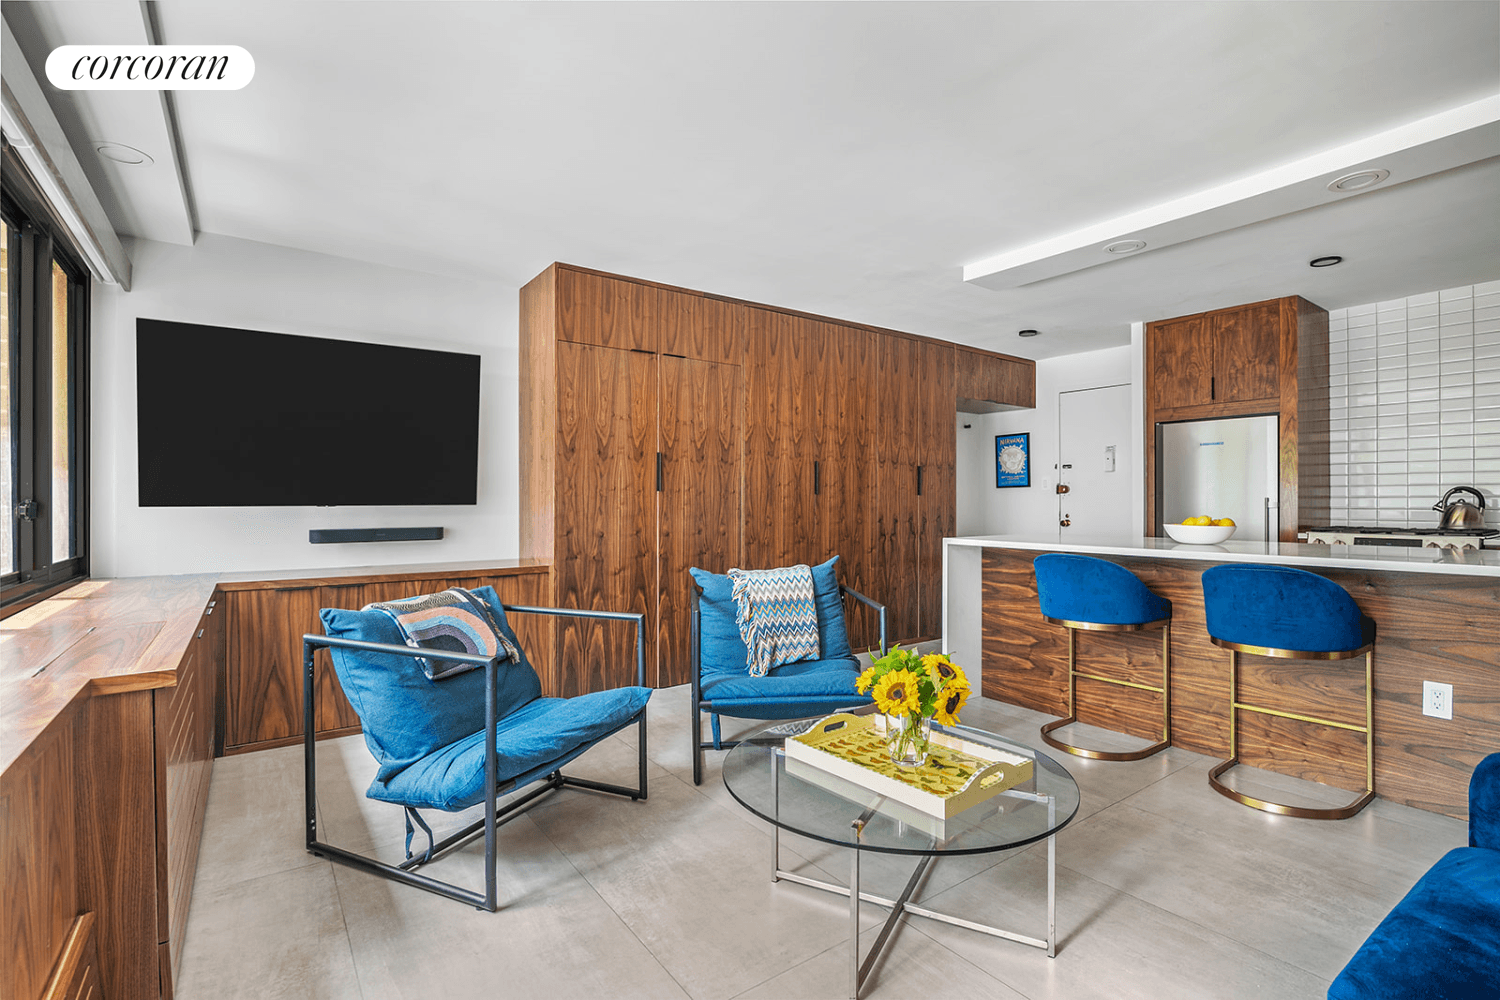 Modern Convertible Luxury Studio Nestled in Private Courtyard Steps Away from South Street Seaport and Financial DistrictExperience the pinnacle of contemporary downtown living in this architecturally designed, stylishly renovated residence.